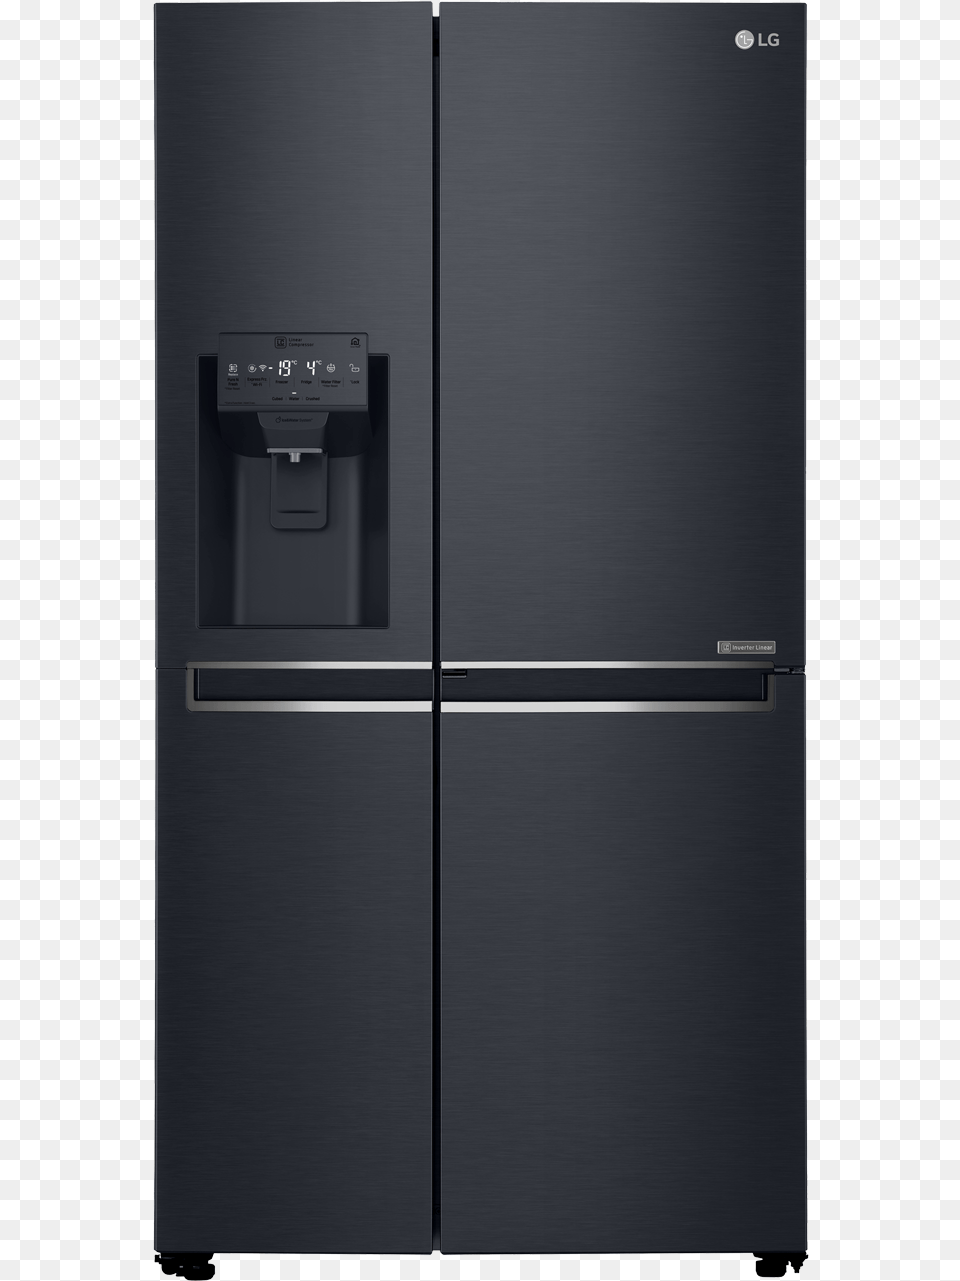 Lg Fridge, Appliance, Device, Electrical Device, Refrigerator Png Image